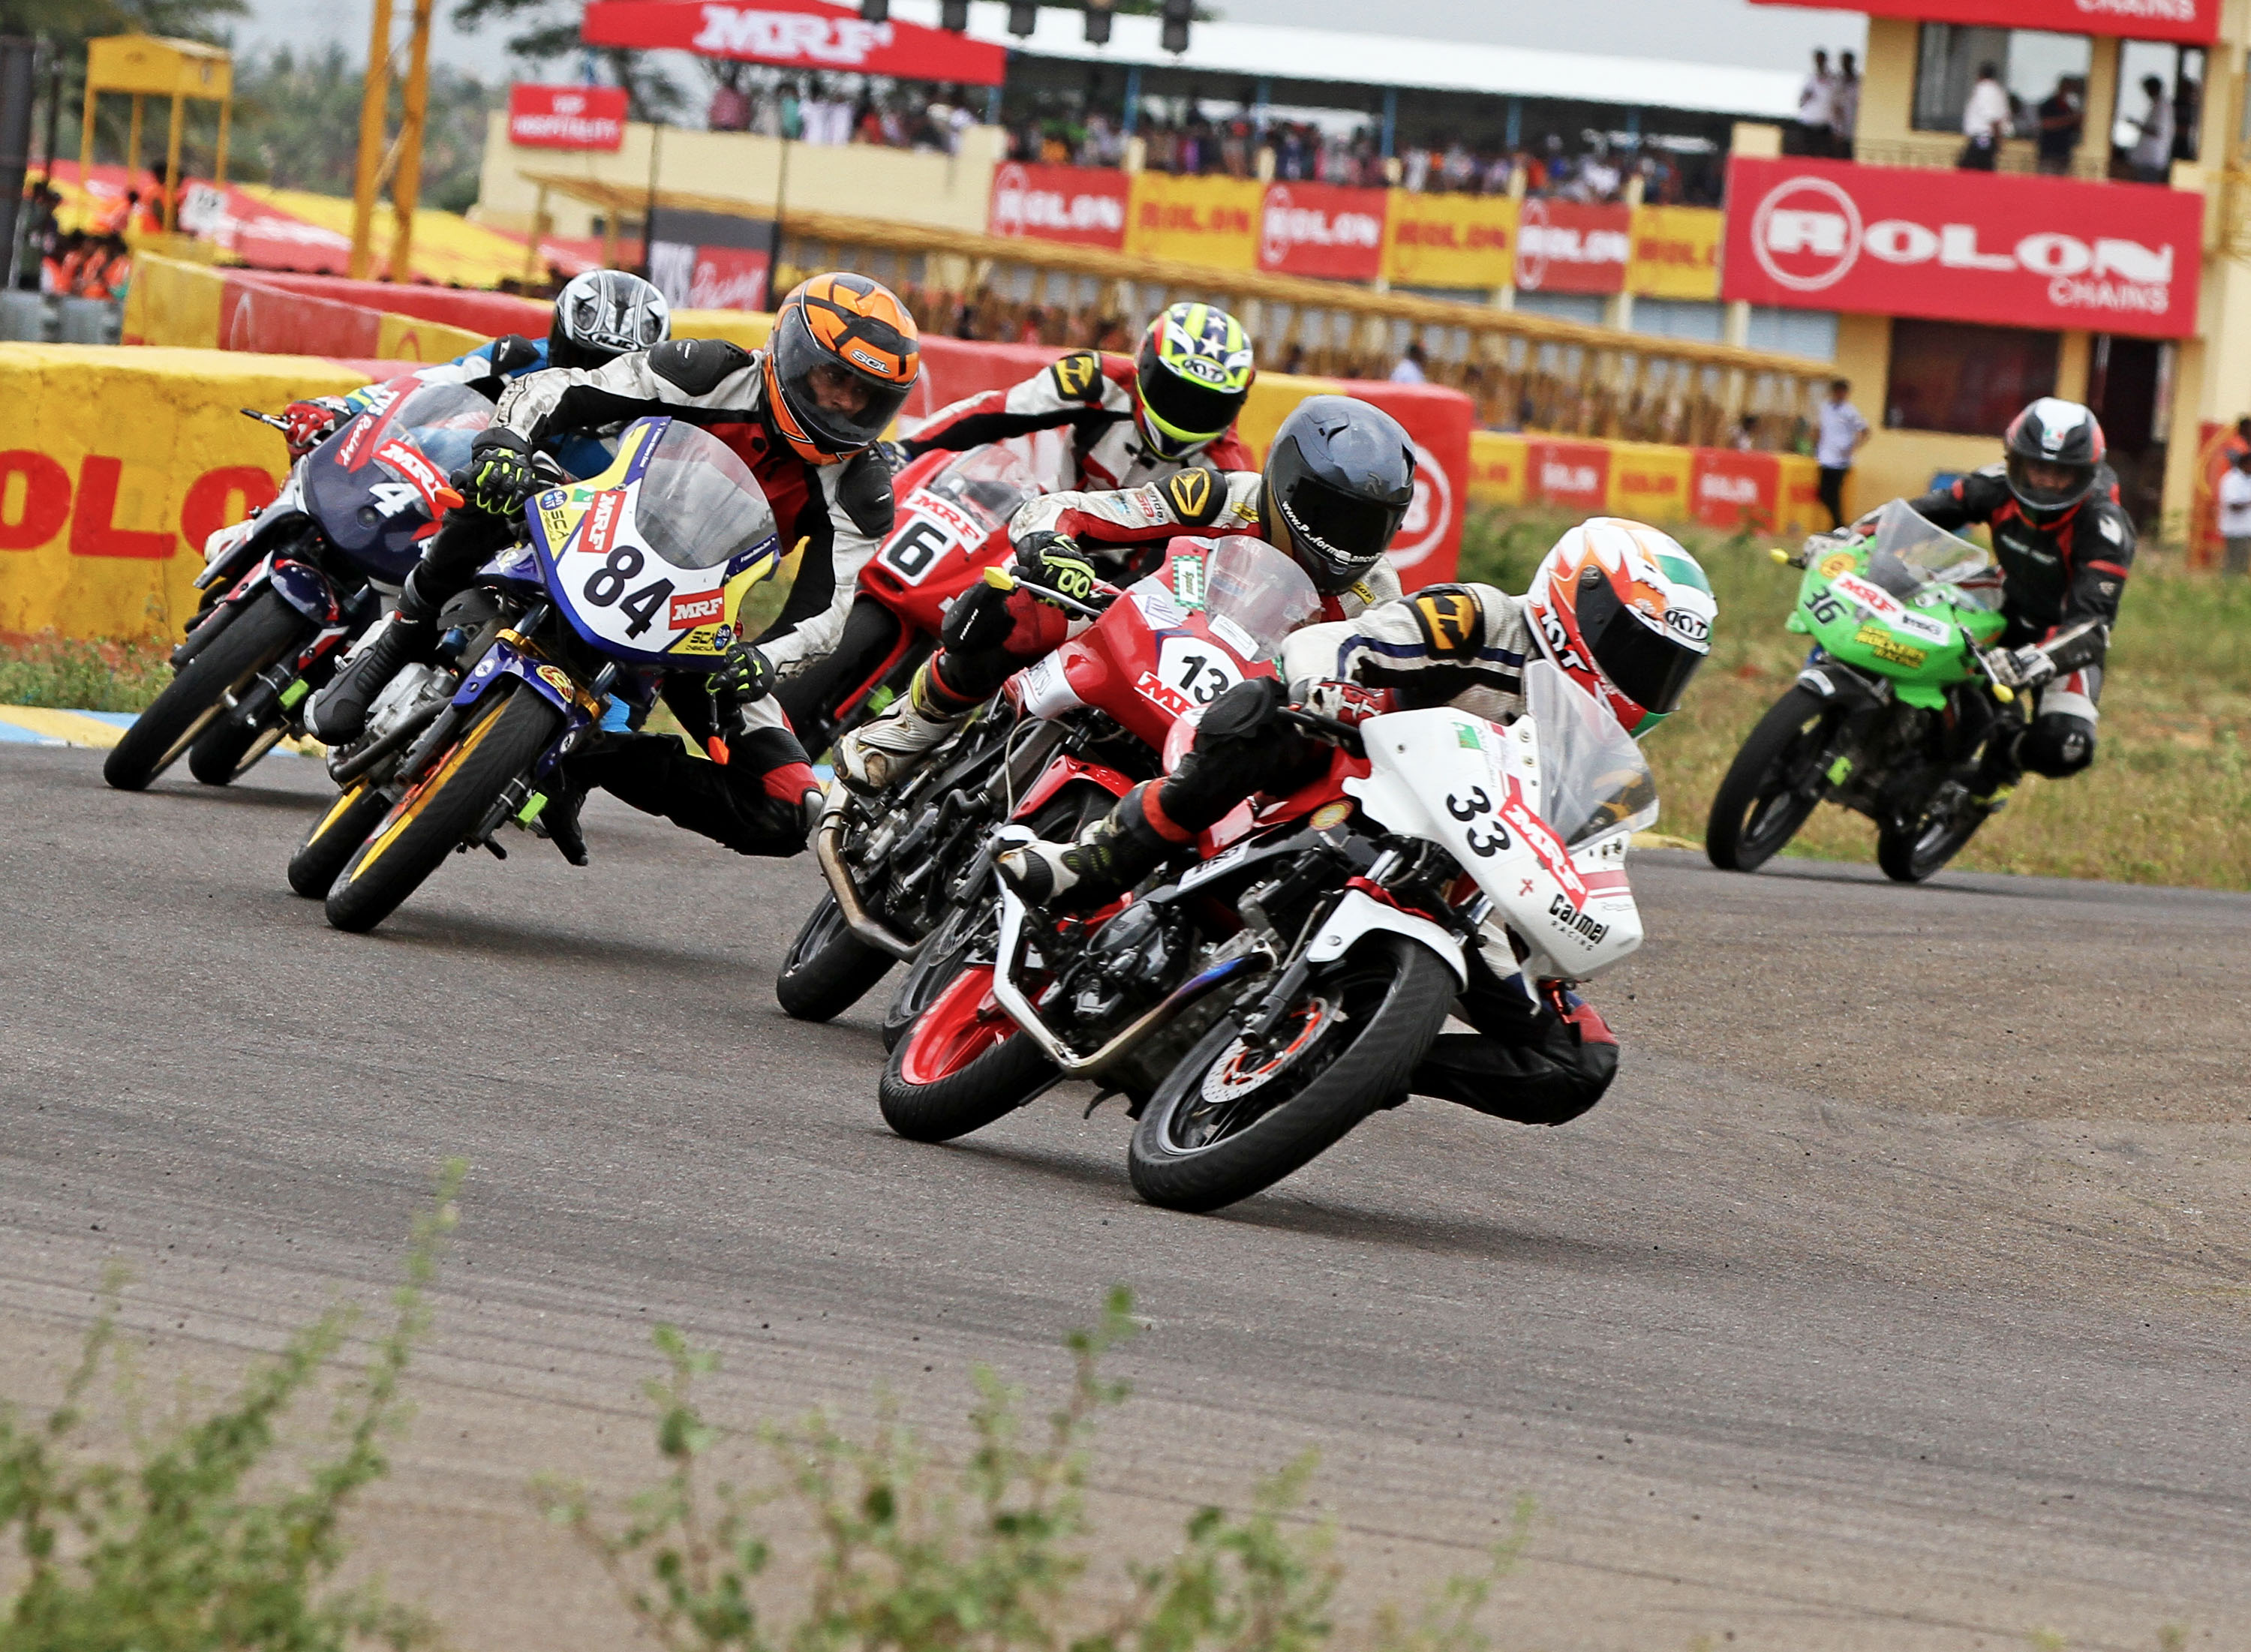 Photo of 200 entries for Rolon round of MRF MMSC fmsci Indian National Motorcycle Racing Championship